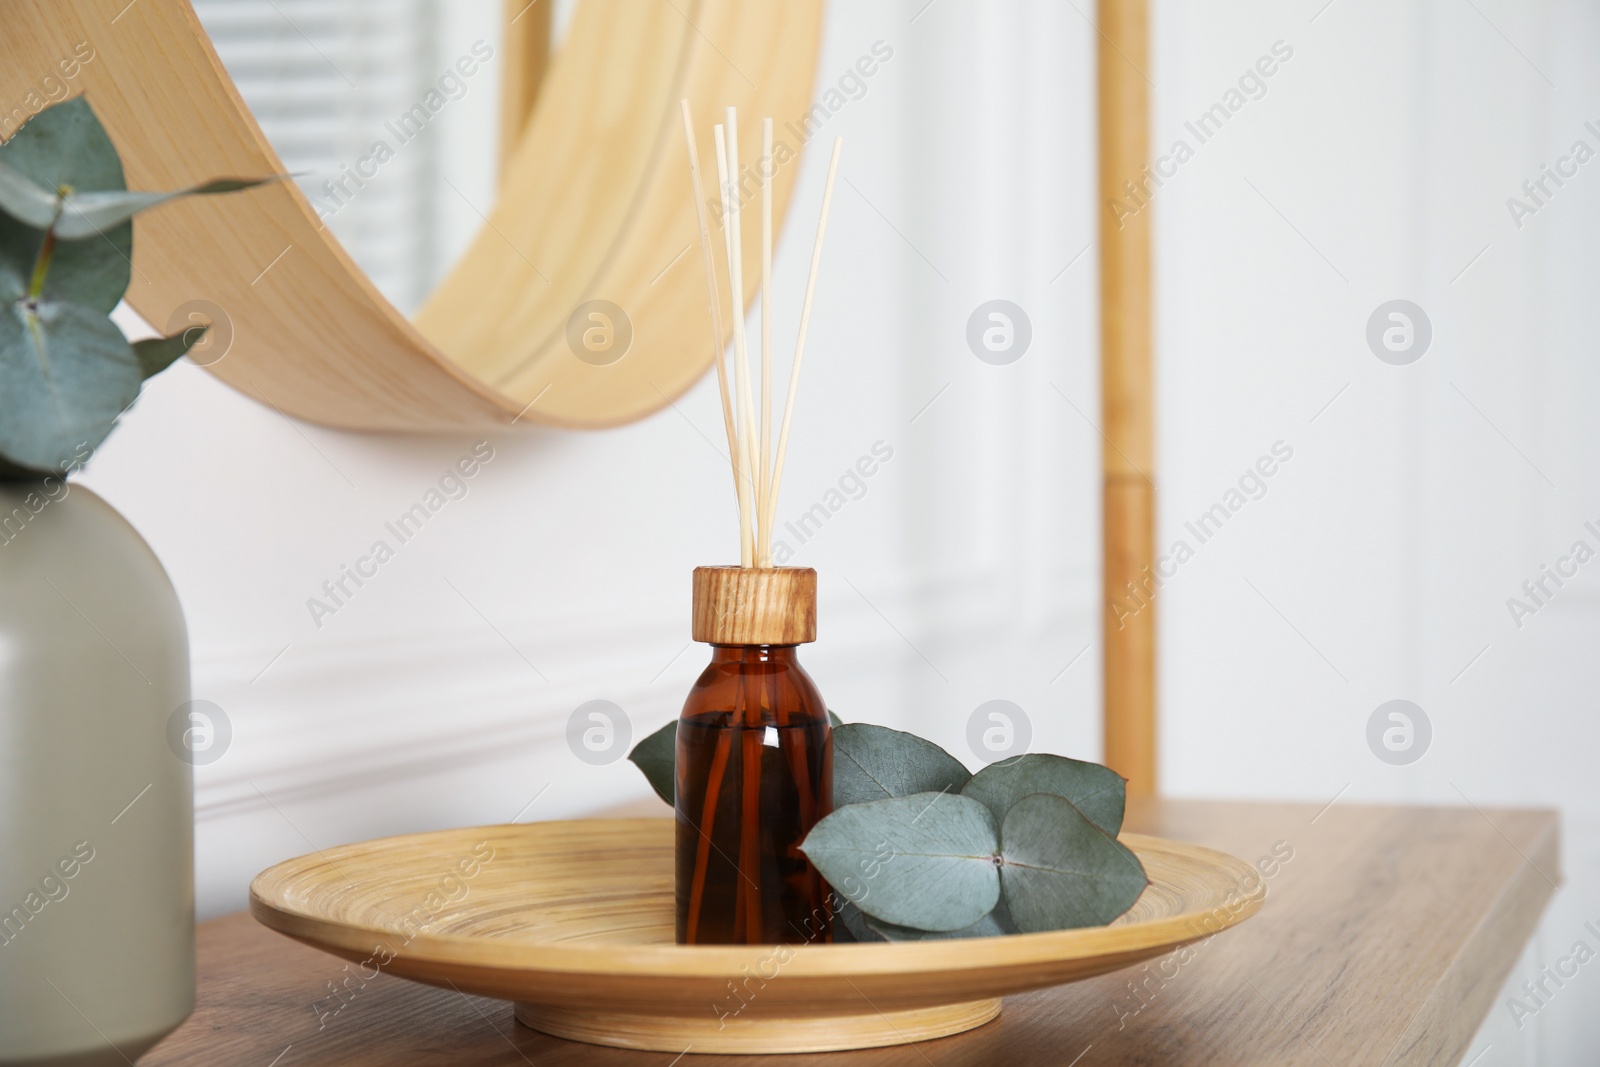 Photo of Reed diffuser and home decor on wooden table in room